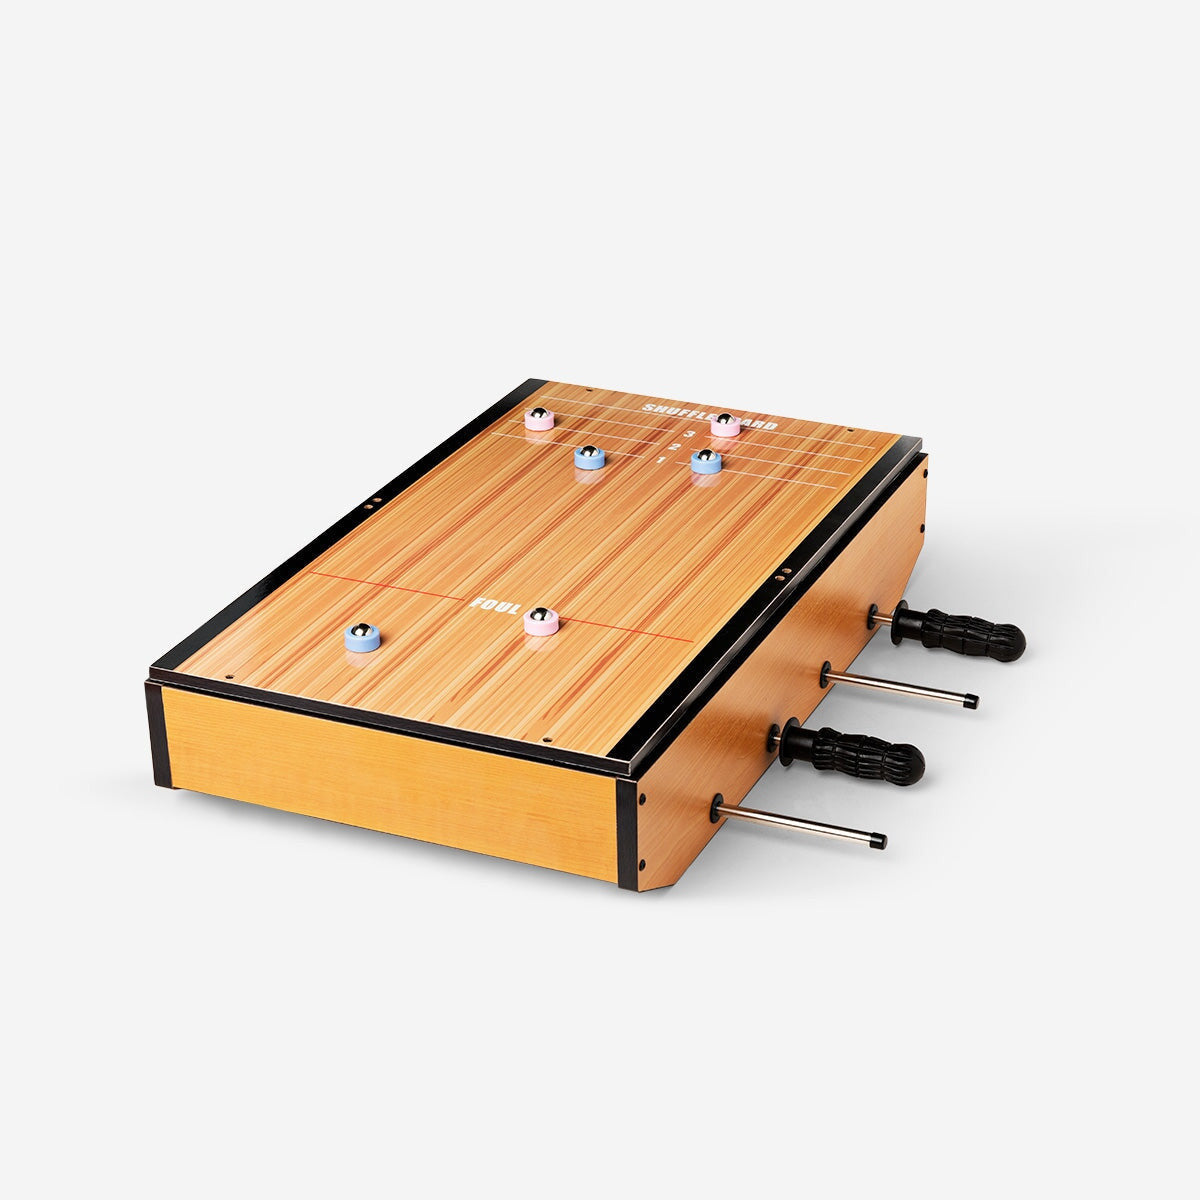 3-in-1 table game. Football, table tennis and shuffleboard Game Flying Tiger Copenhagen 